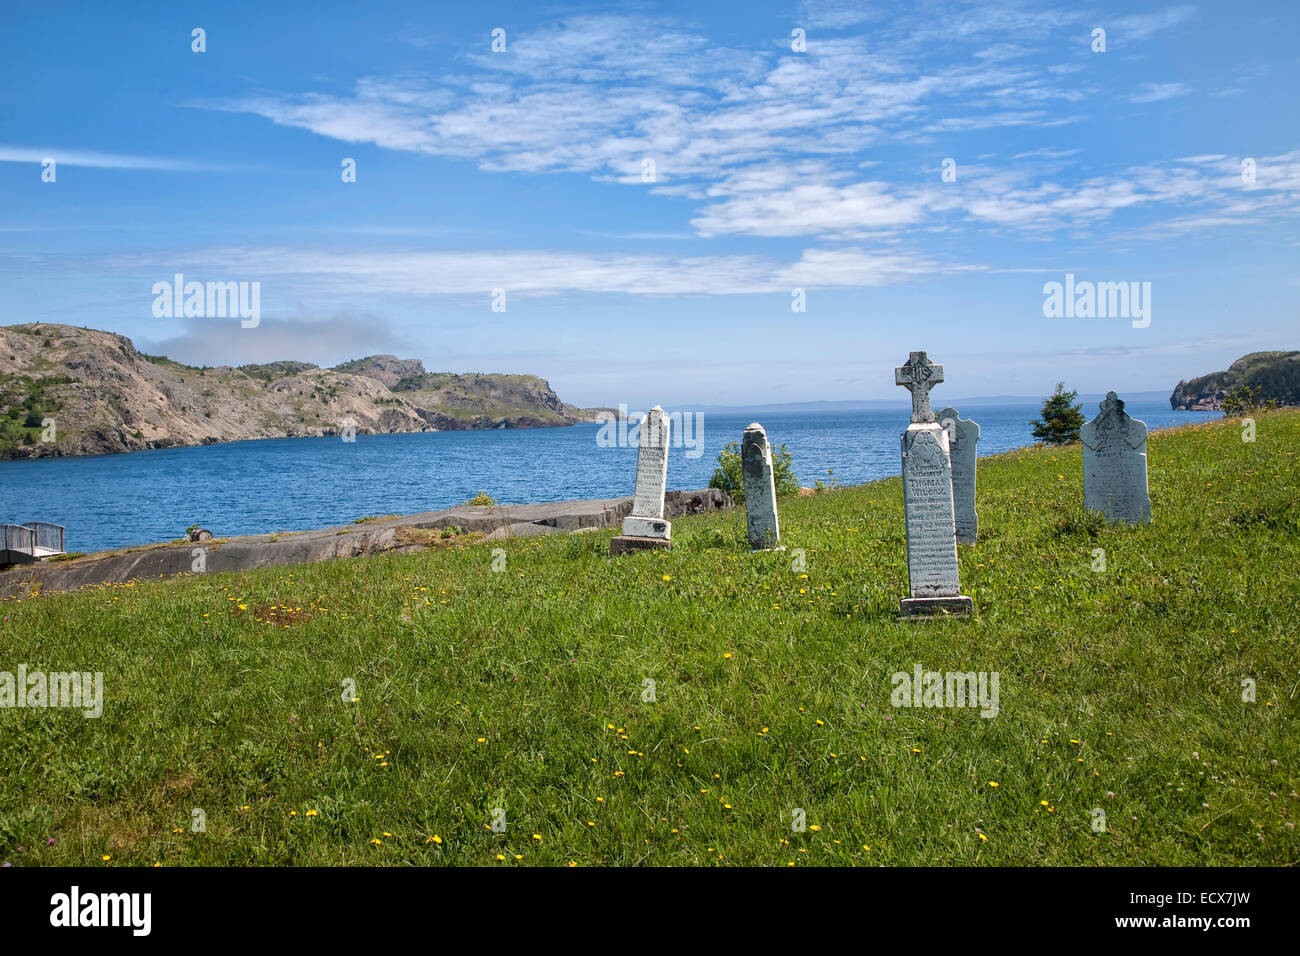 Very old cemetery on the shore of Brigus Cove in Conception (Brigus) Bay Newfoundland, Canada. Stock Photo